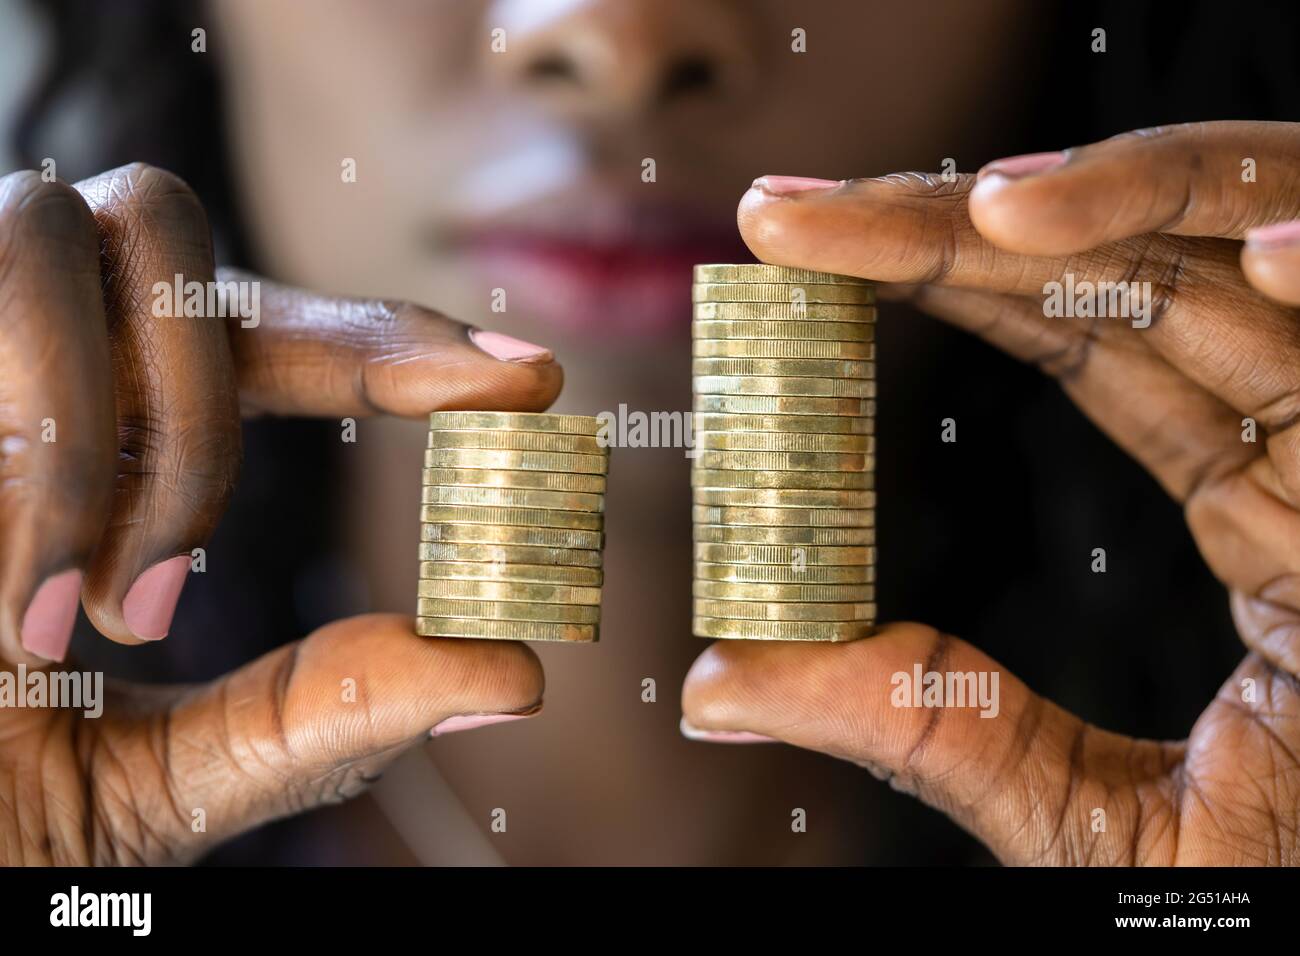 Compare Wage Gap And Tax Differences. Equal Pay Stock Photo